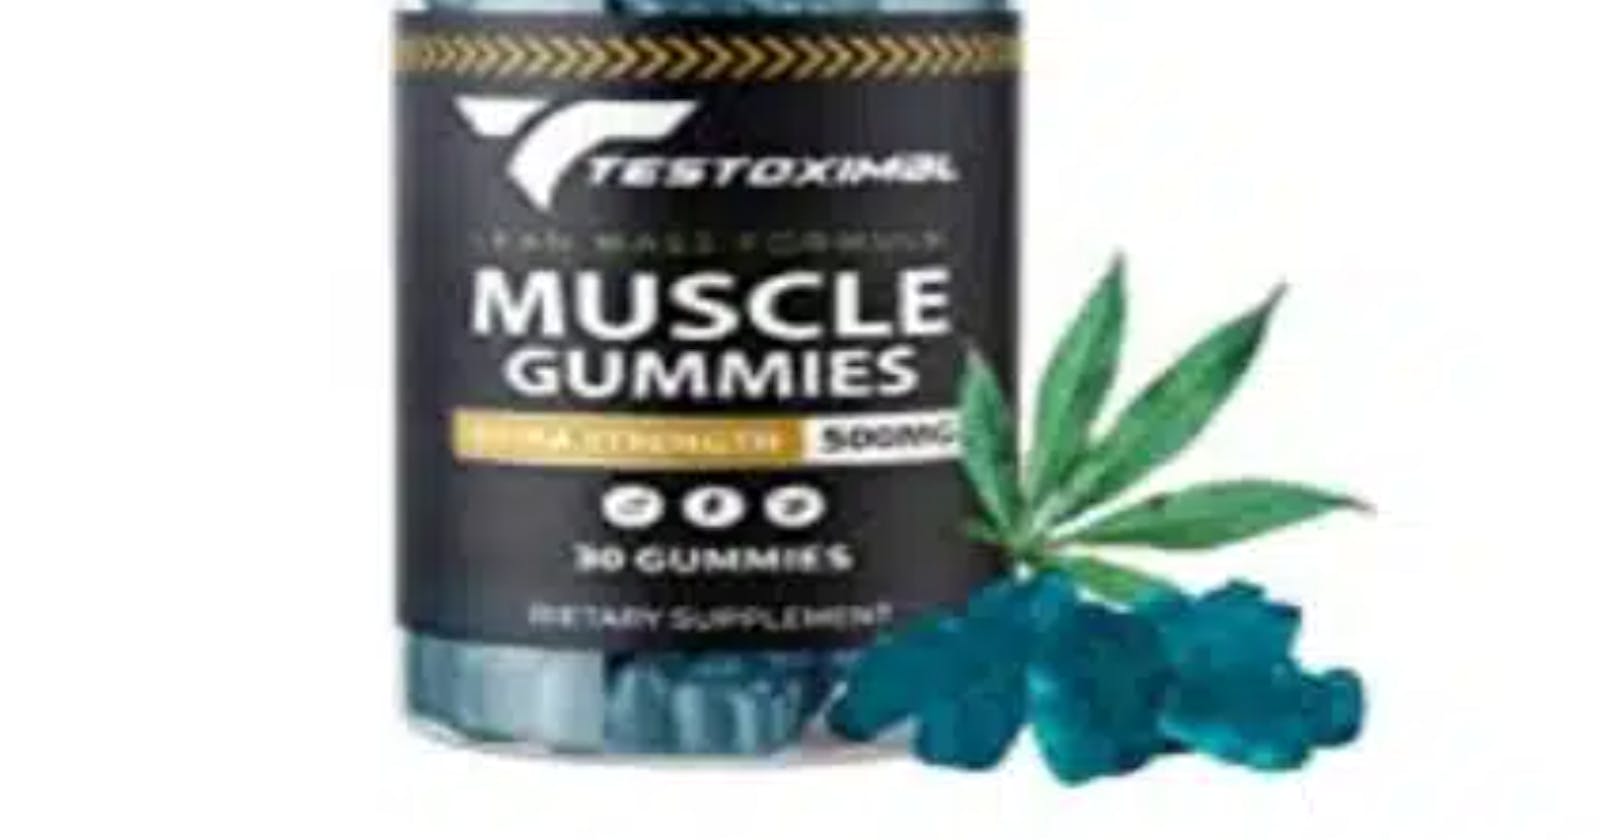 Testoximal Muscle Gummies Official Store In USA?